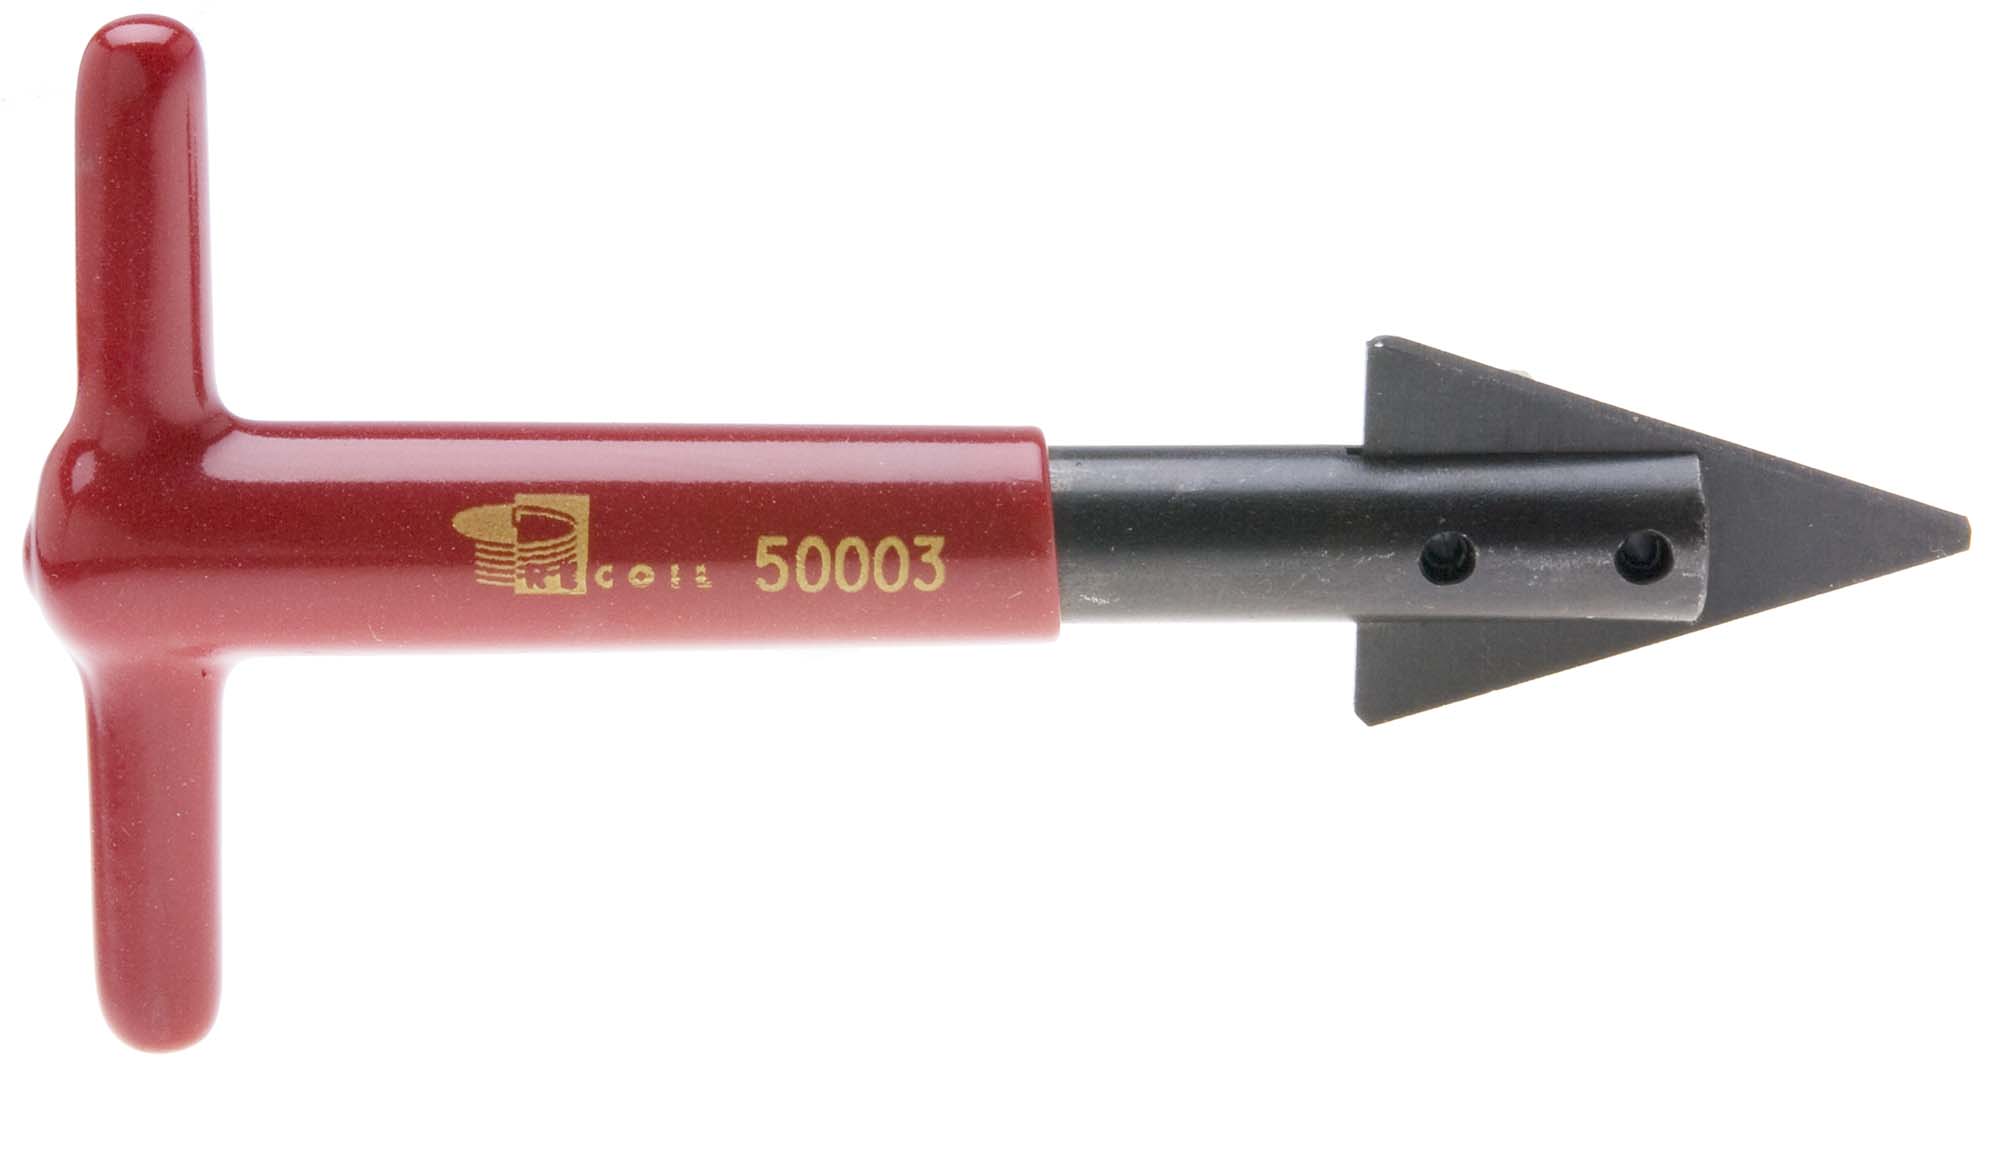 6-32 - 1" Recoil Insert Extracting Tool